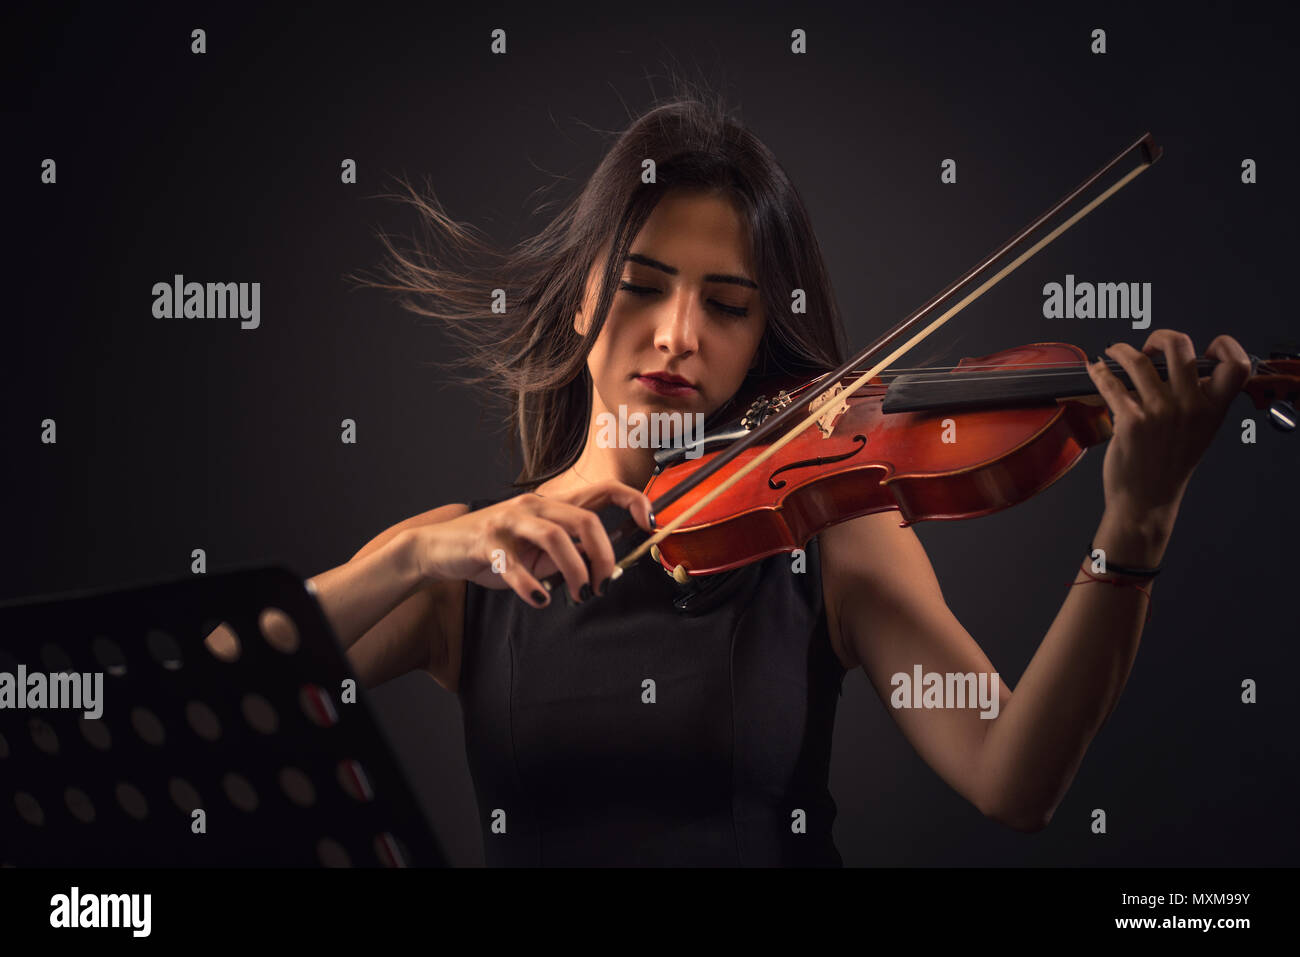 Pretty young woman playing a violin over black background. Stock Photo